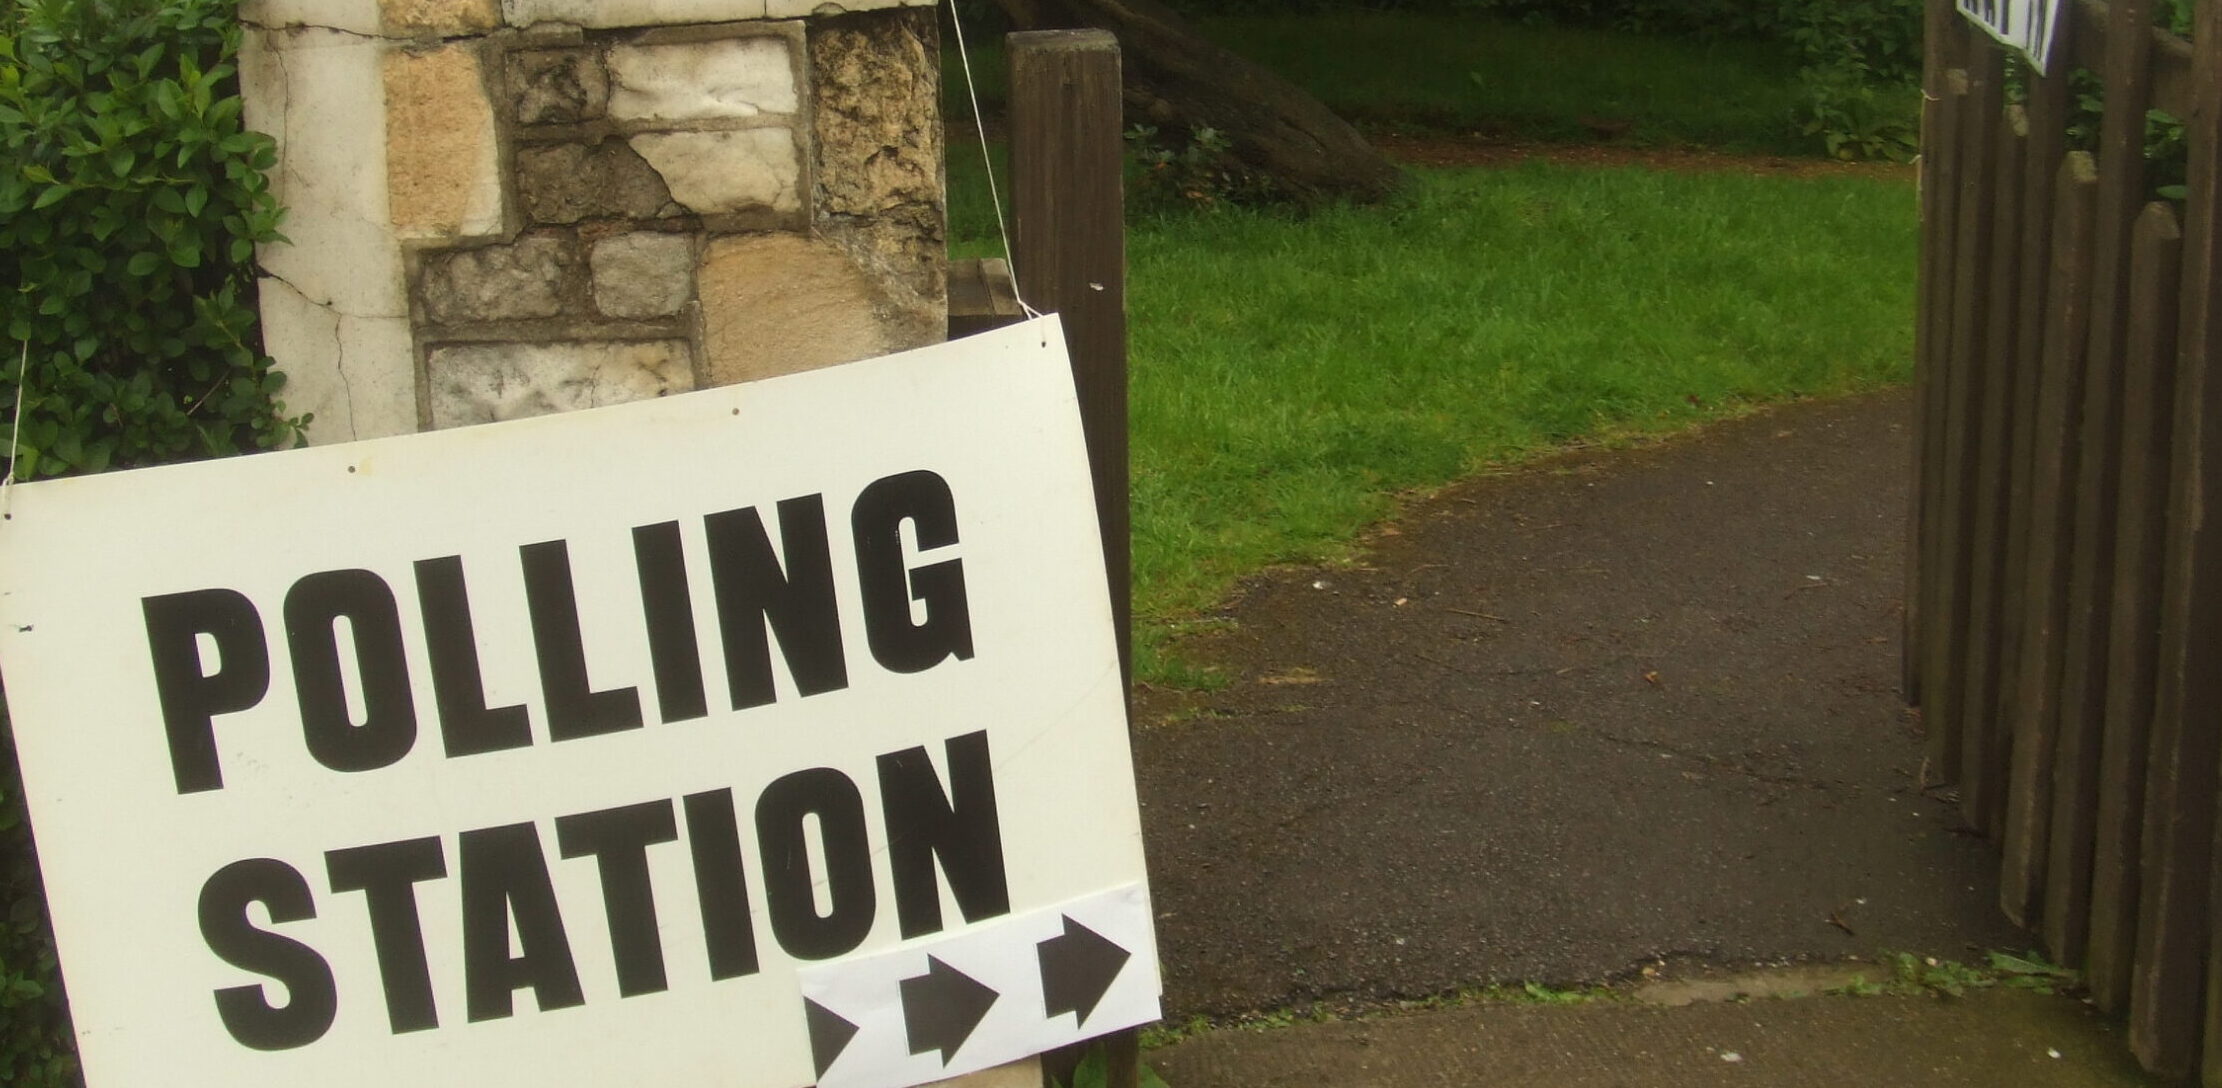 A sign bearing the words 'Polling Station' hangs from a stone gatepost on the edge of a churchyard. The gatepost has a decorative pointy top, signs of wear and exposed brickwork. Arrows on the bottom of the sign point down the path into the churchyard. A wooden gate stands open, inviting the viewer inside.